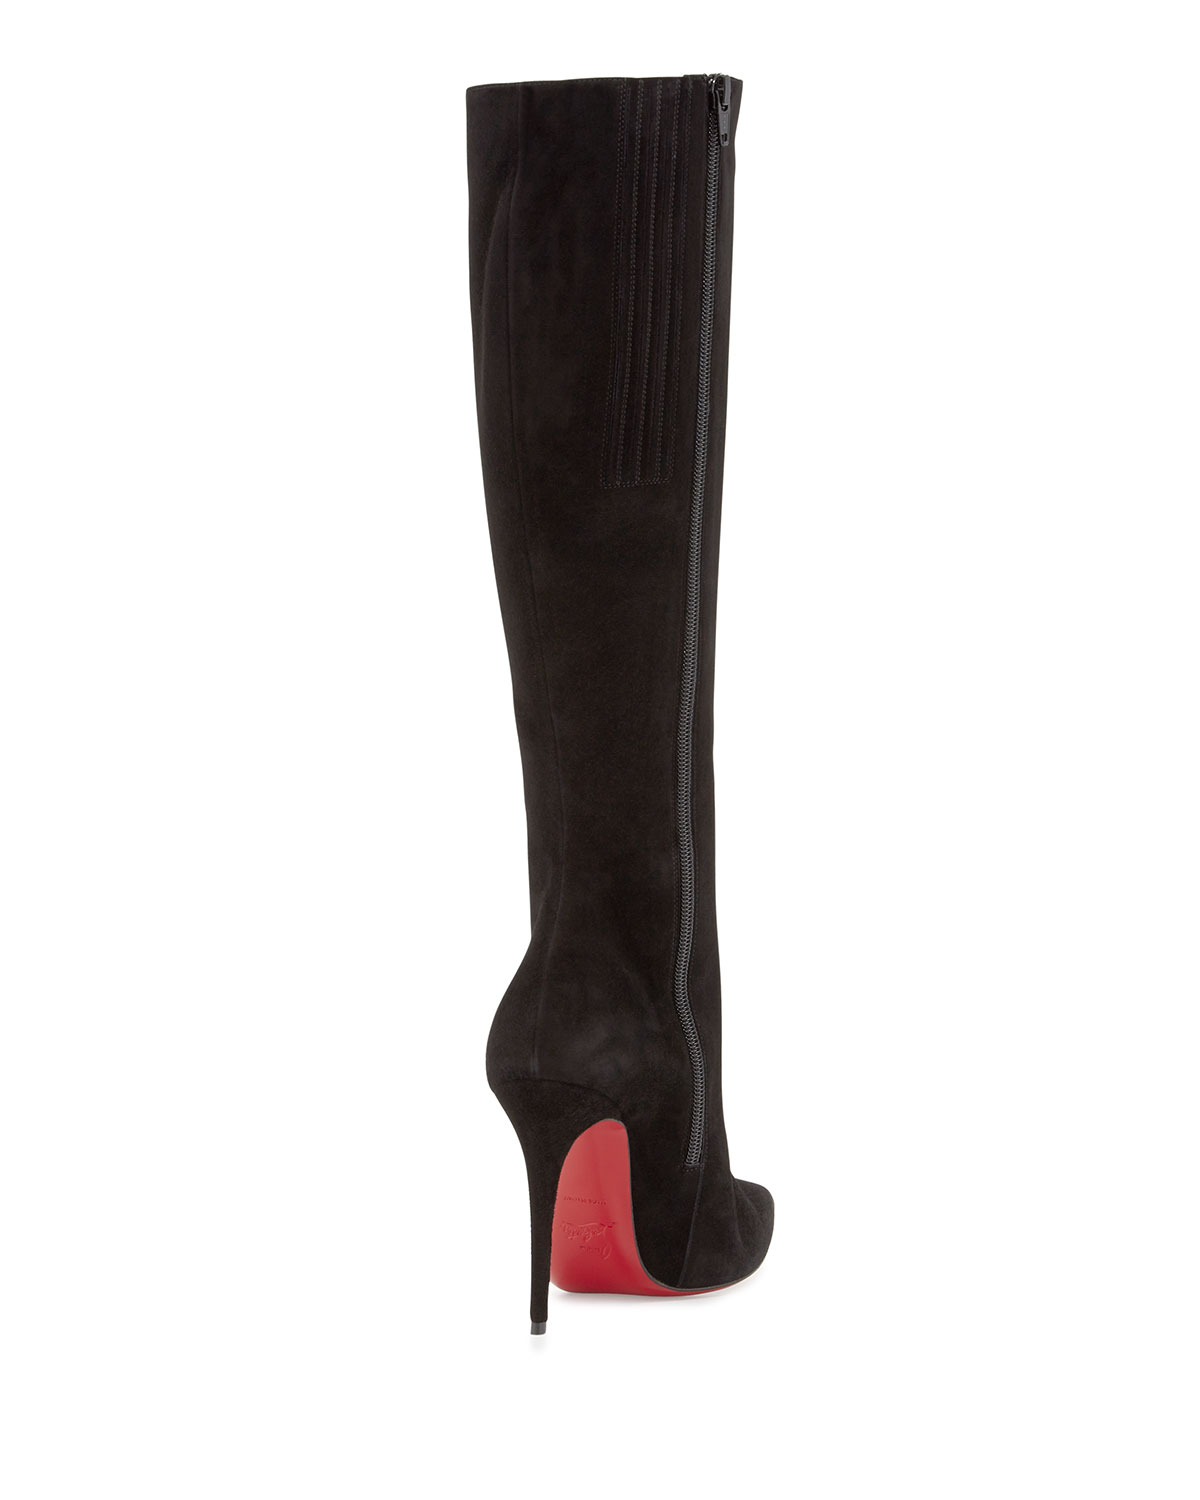 Lyst - Christian Louboutin Tournoi Suede Pointed-Toe Knee Boot in Black